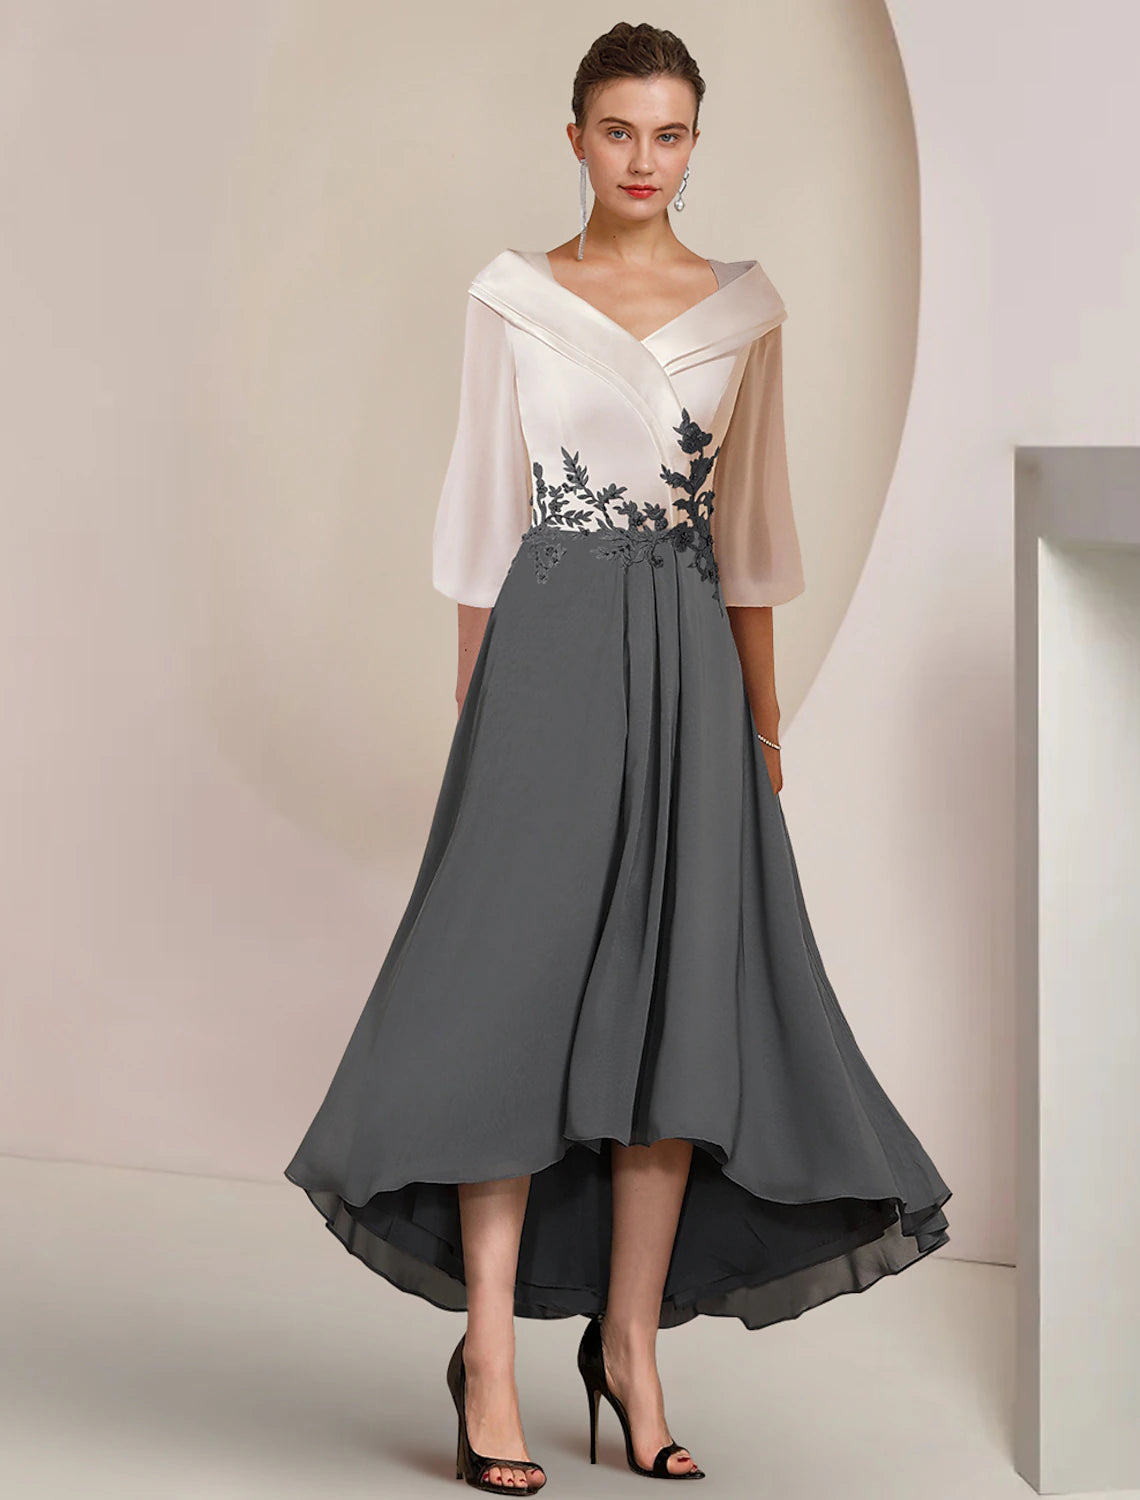 A-Line Mother of the Bride Dress Formal Wedding Guest Elegant High Low V Neck Asymmetrical Tea Length Chiffon Lace 3/4 Length Sleeve with Pleats Appliques Color Block